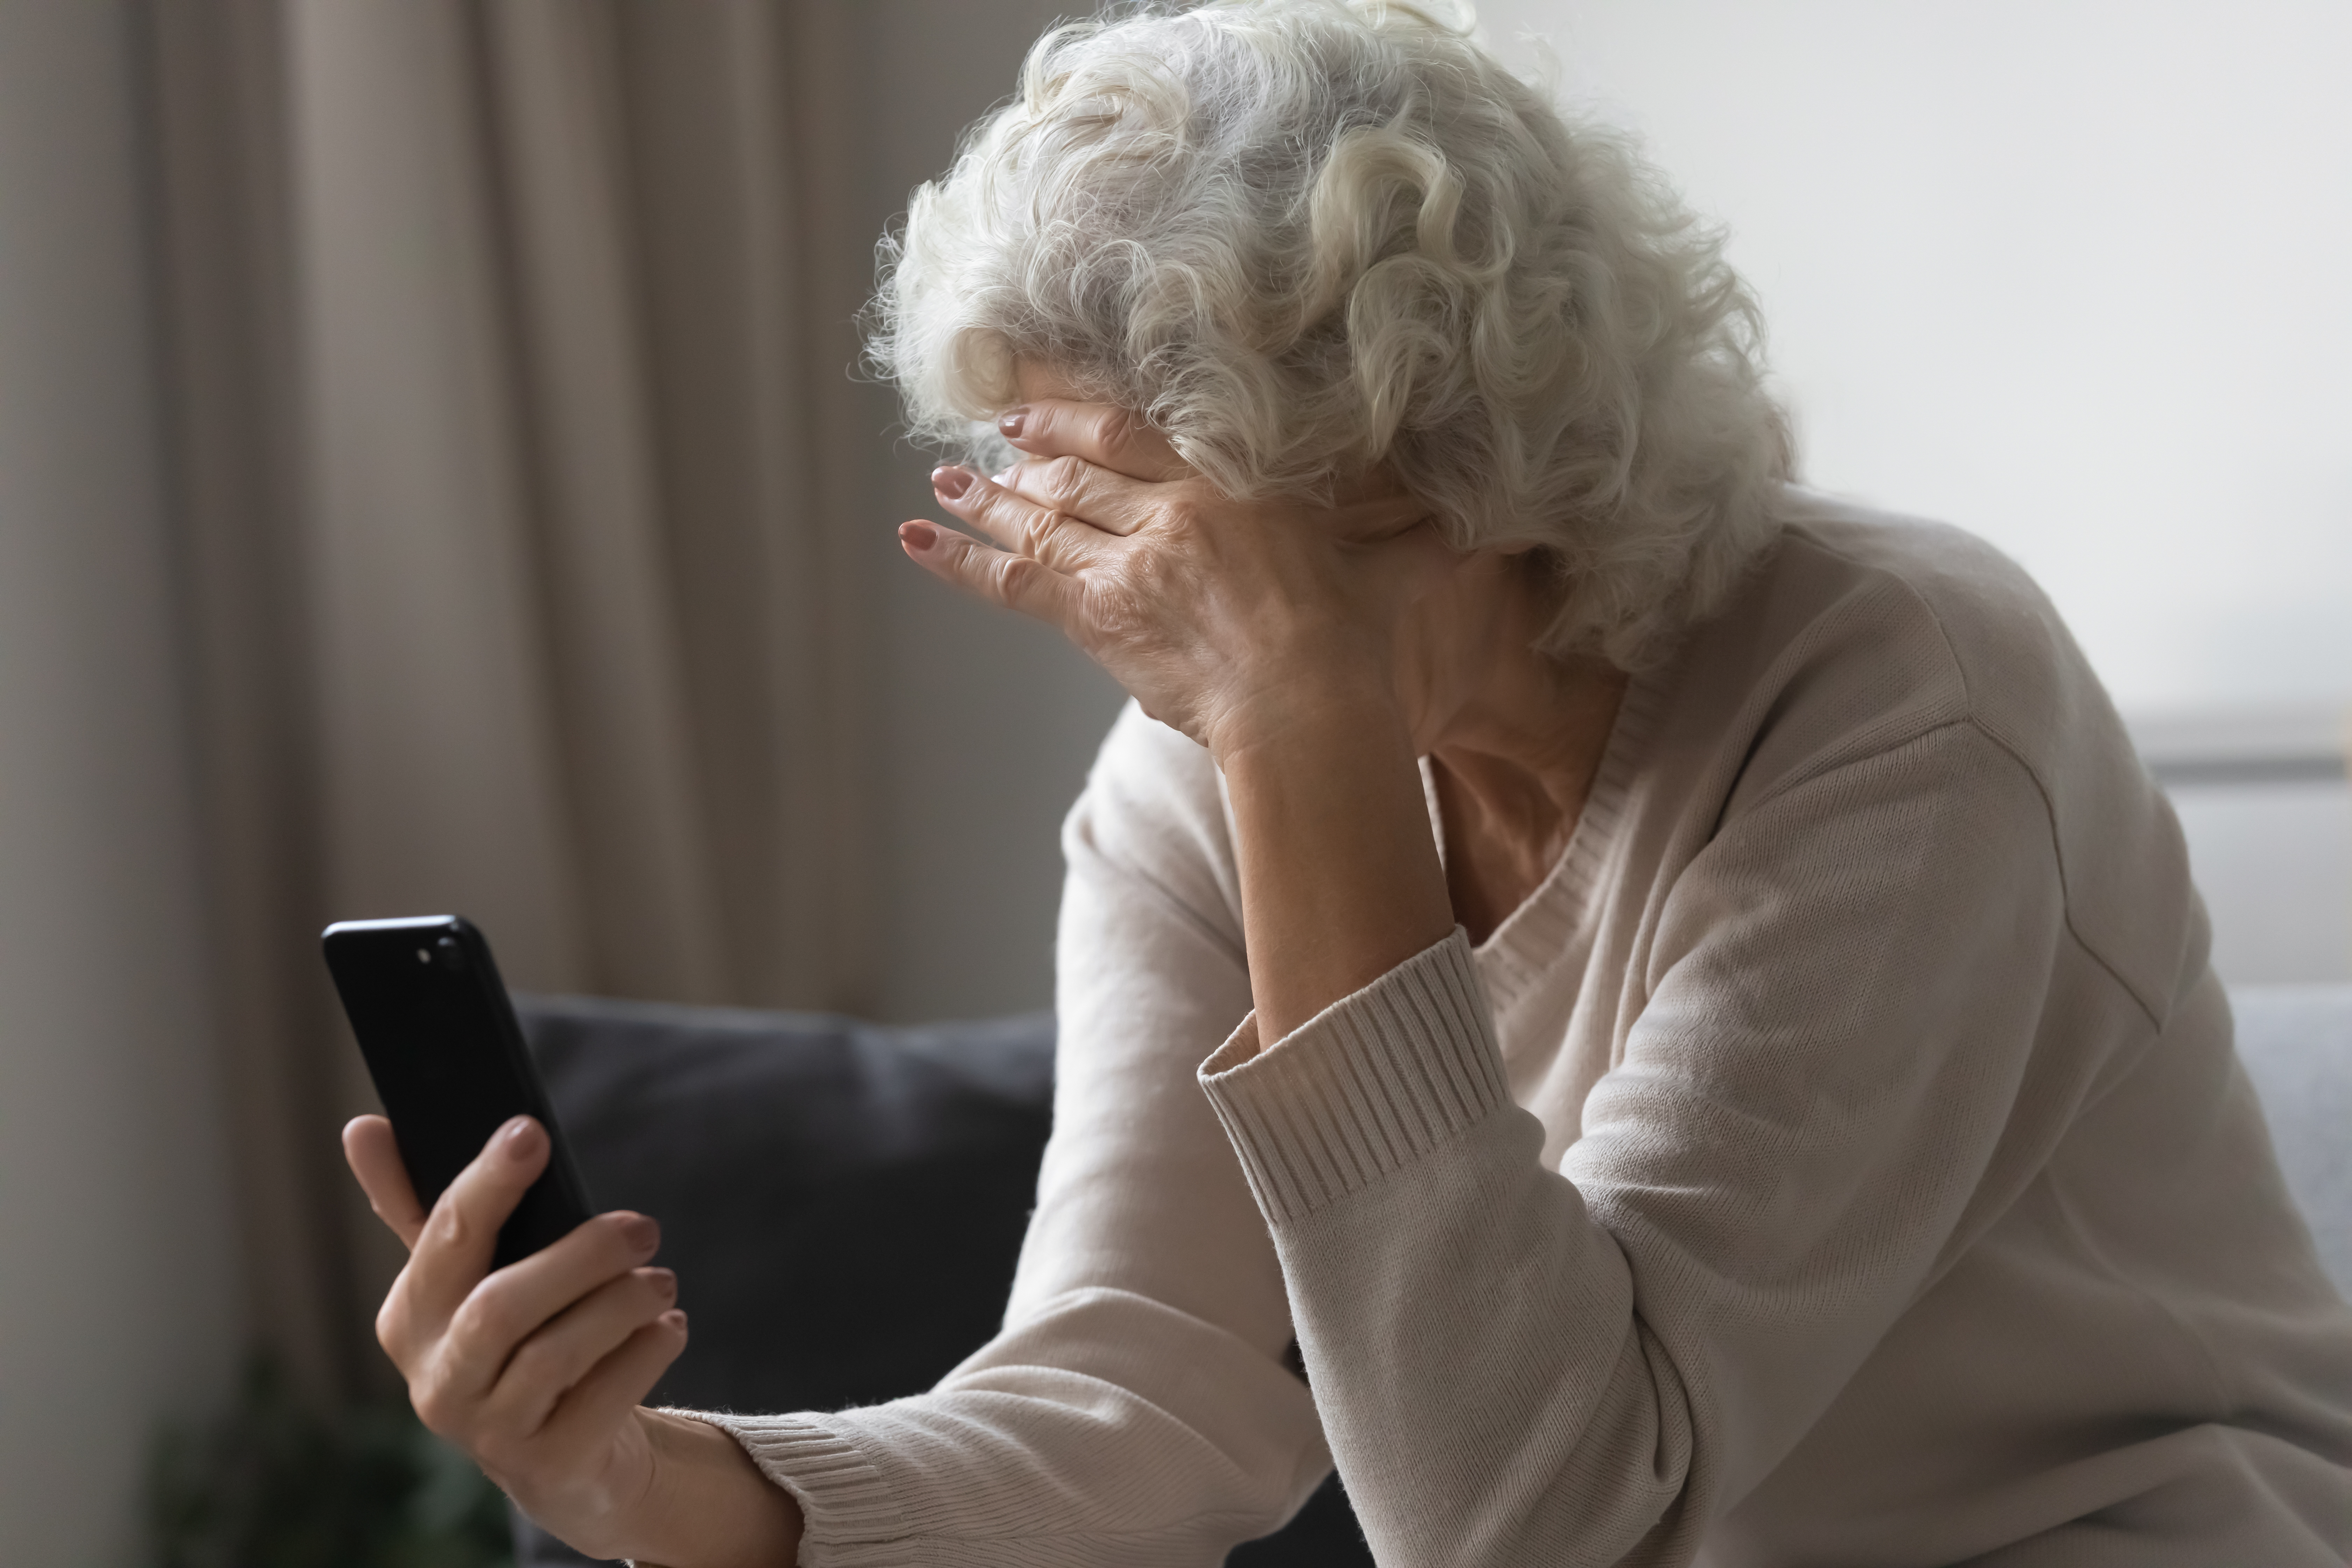 A sad senior woman using her mobile phone | Source: Shutterstock